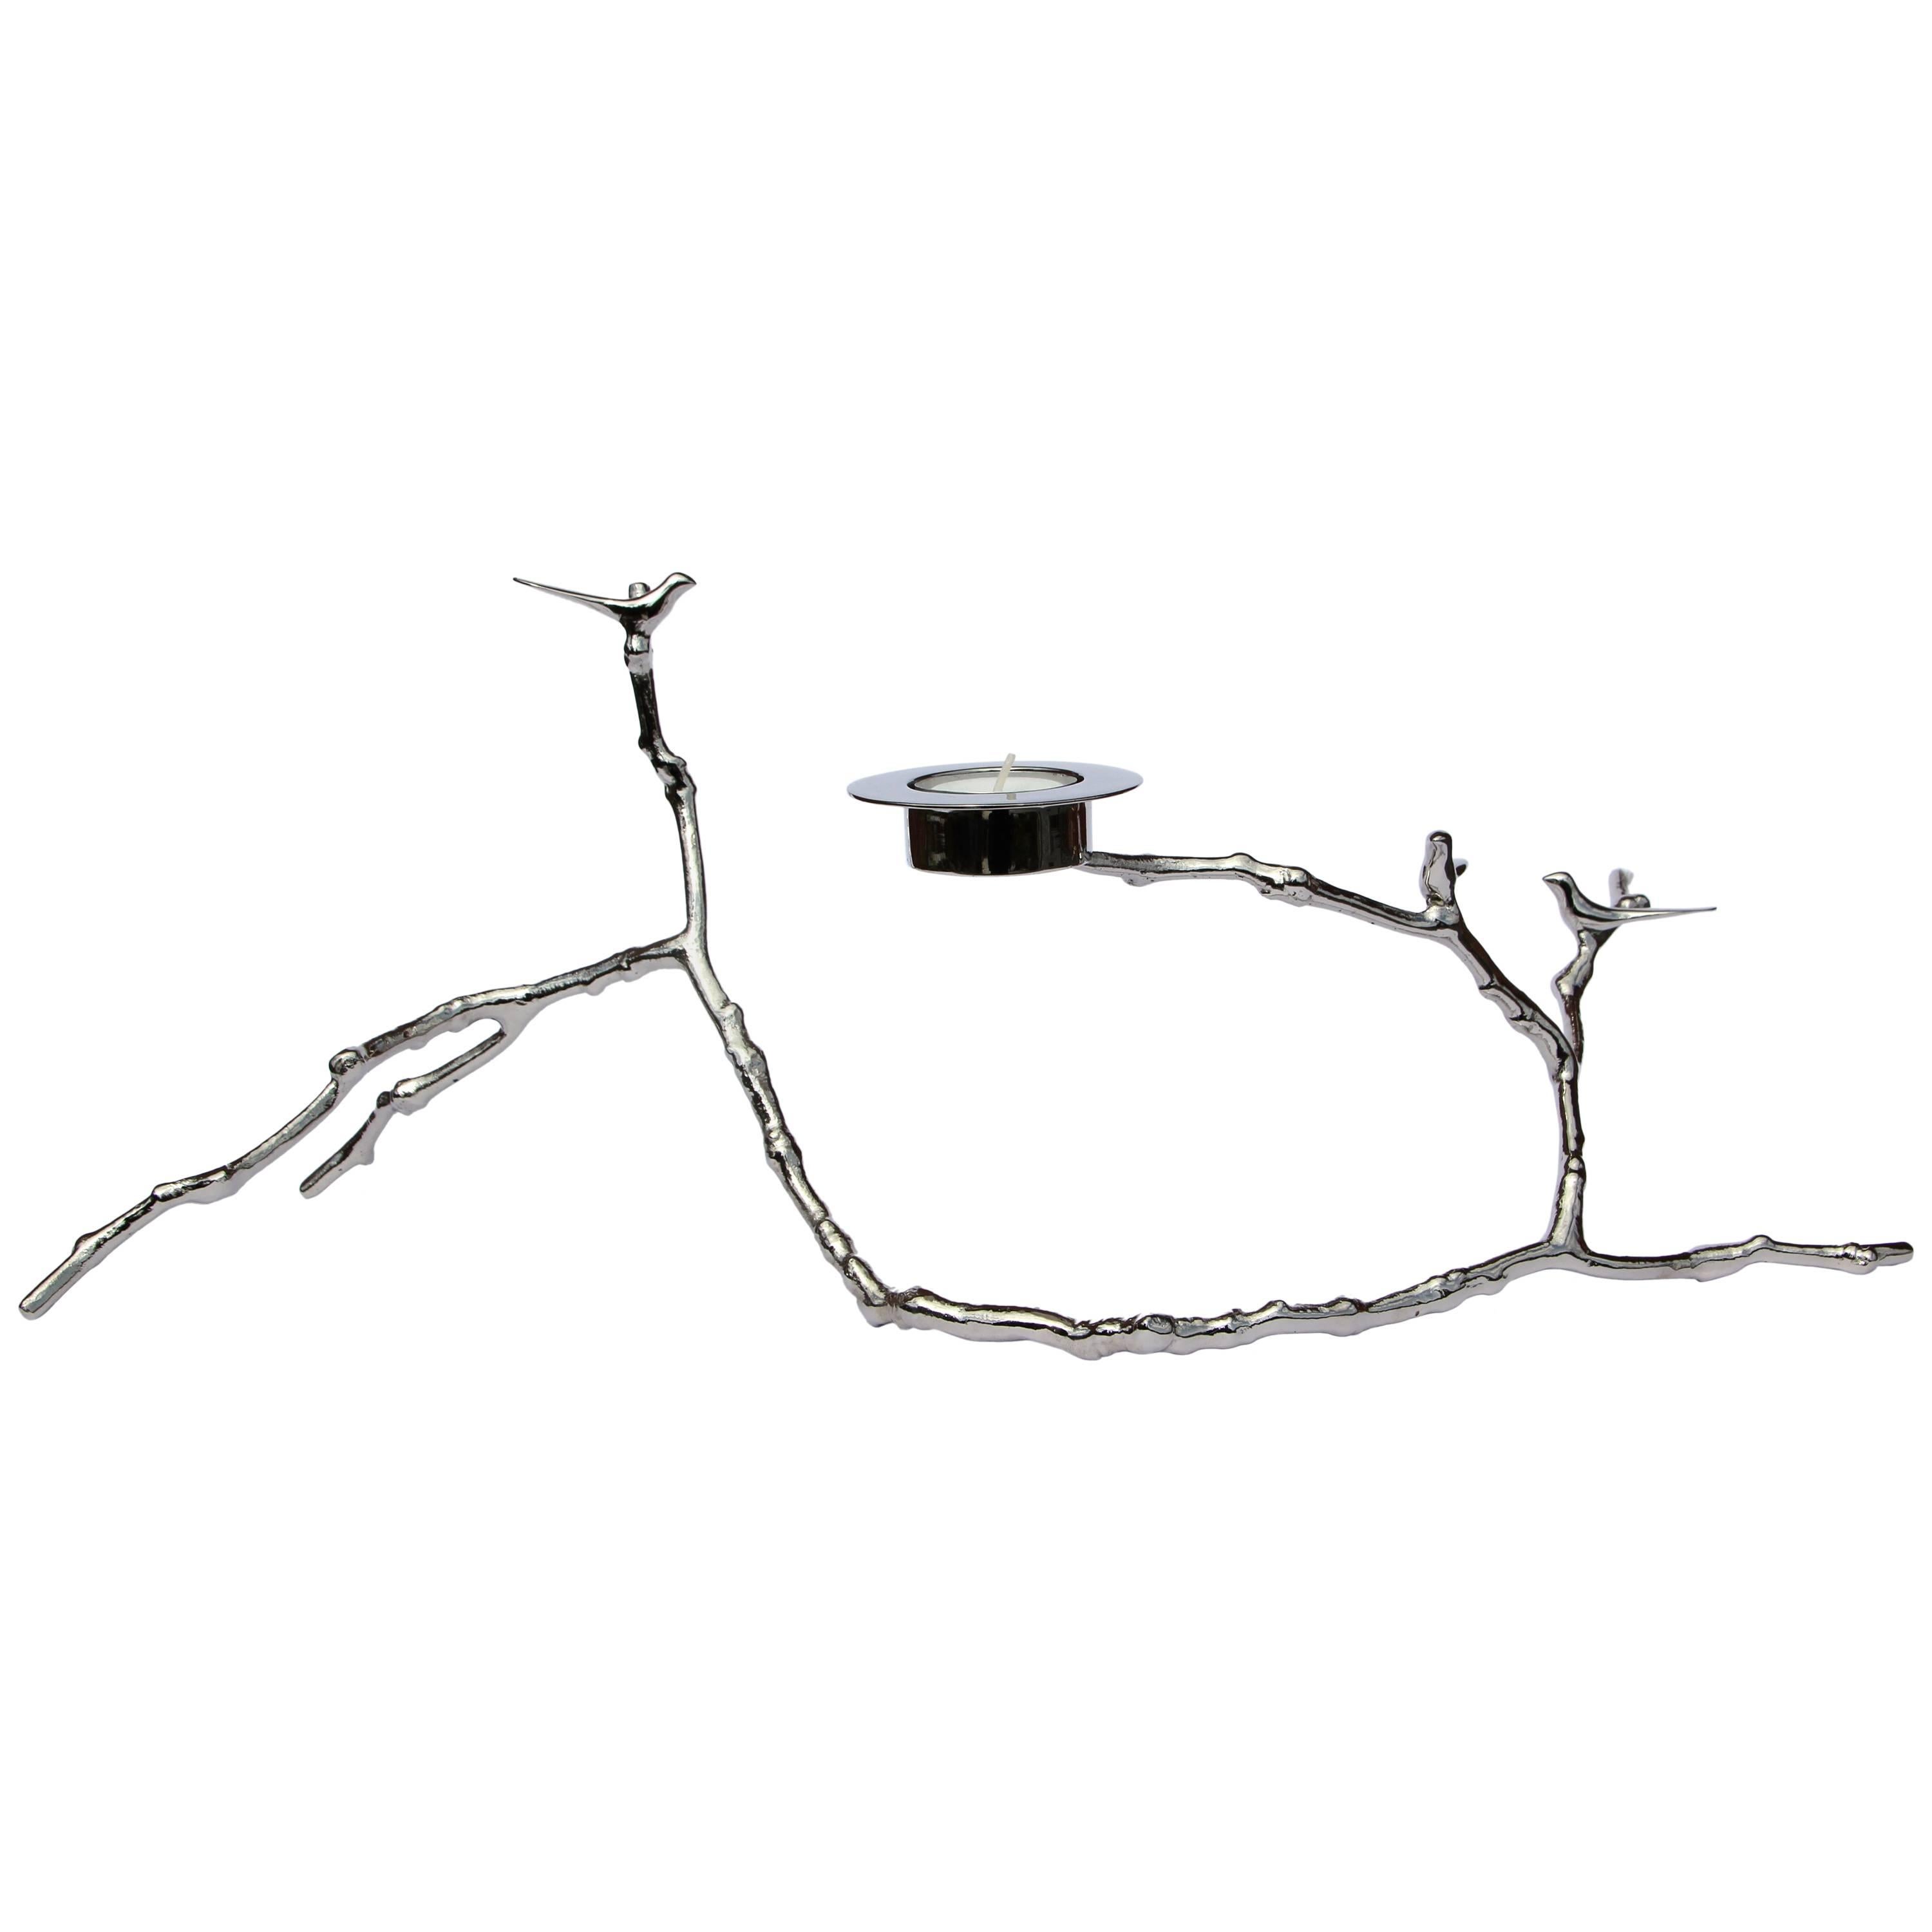 Magnolia Twig T-Light Holder, Nickel-Plated, Long For Sale